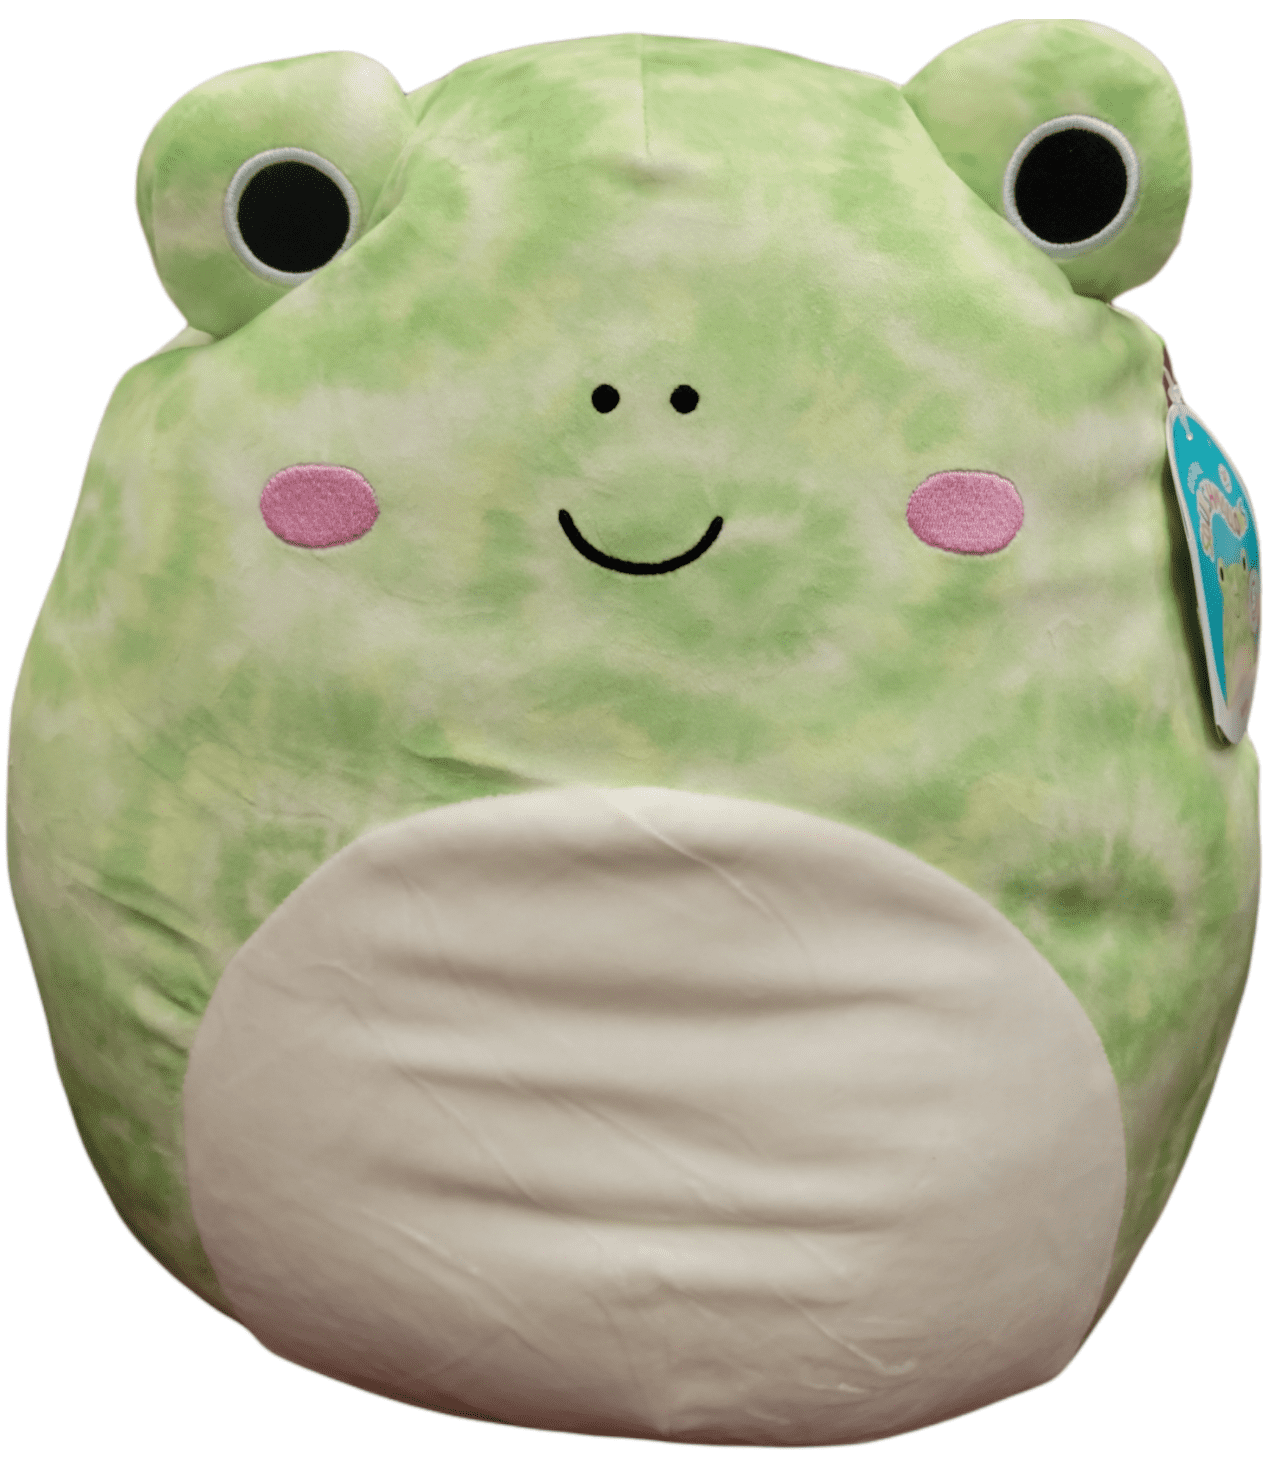 Squishmallows Wendy the Frog 16 inch Plush Toy for sale online 